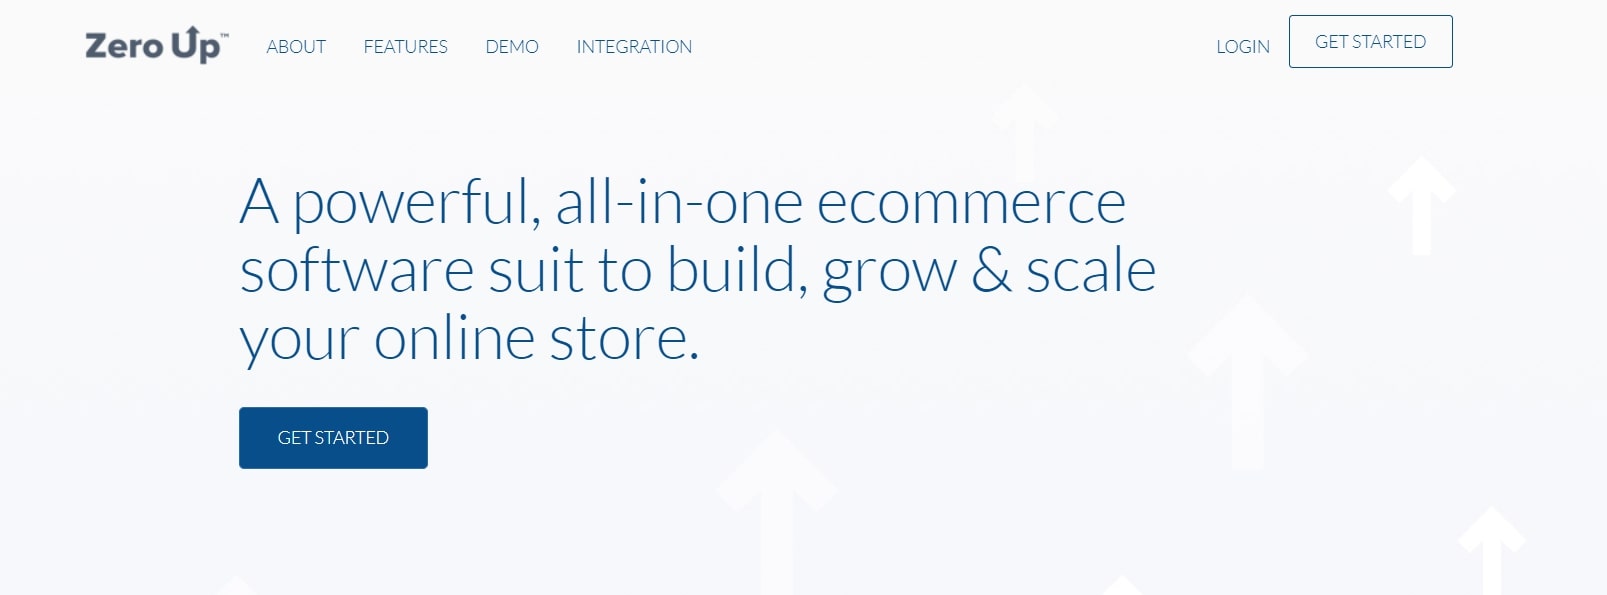 About ZeroUp Shopify and Fred Lam